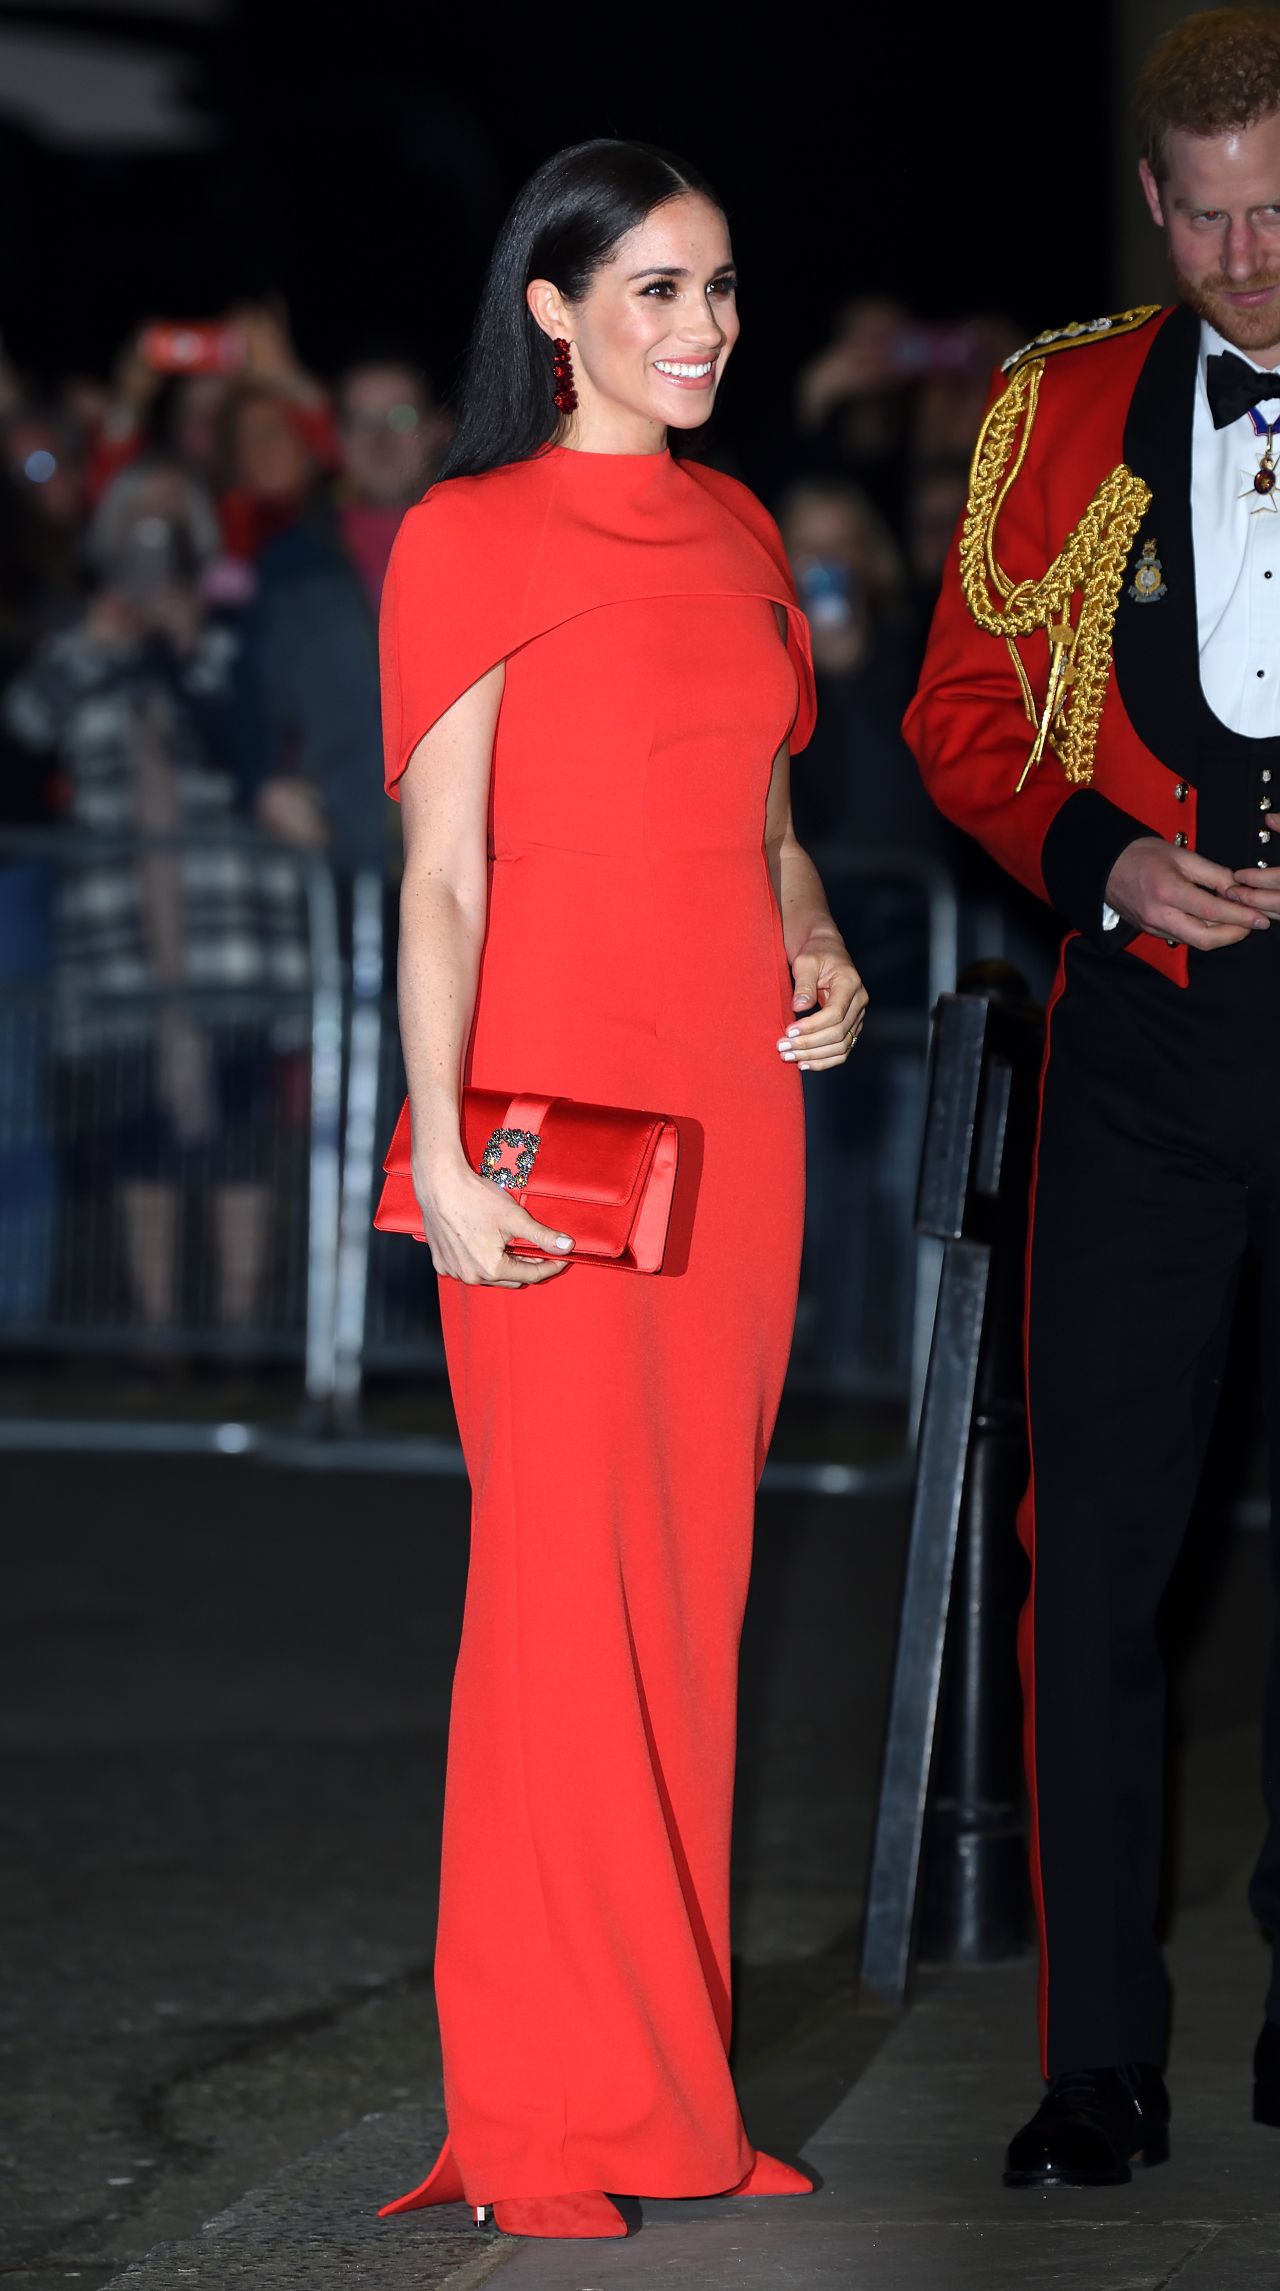 Meghan, Duchess of Sussex, wears Safiyaa at the Mountbatten Festival of Music at Royal Albert Hall.